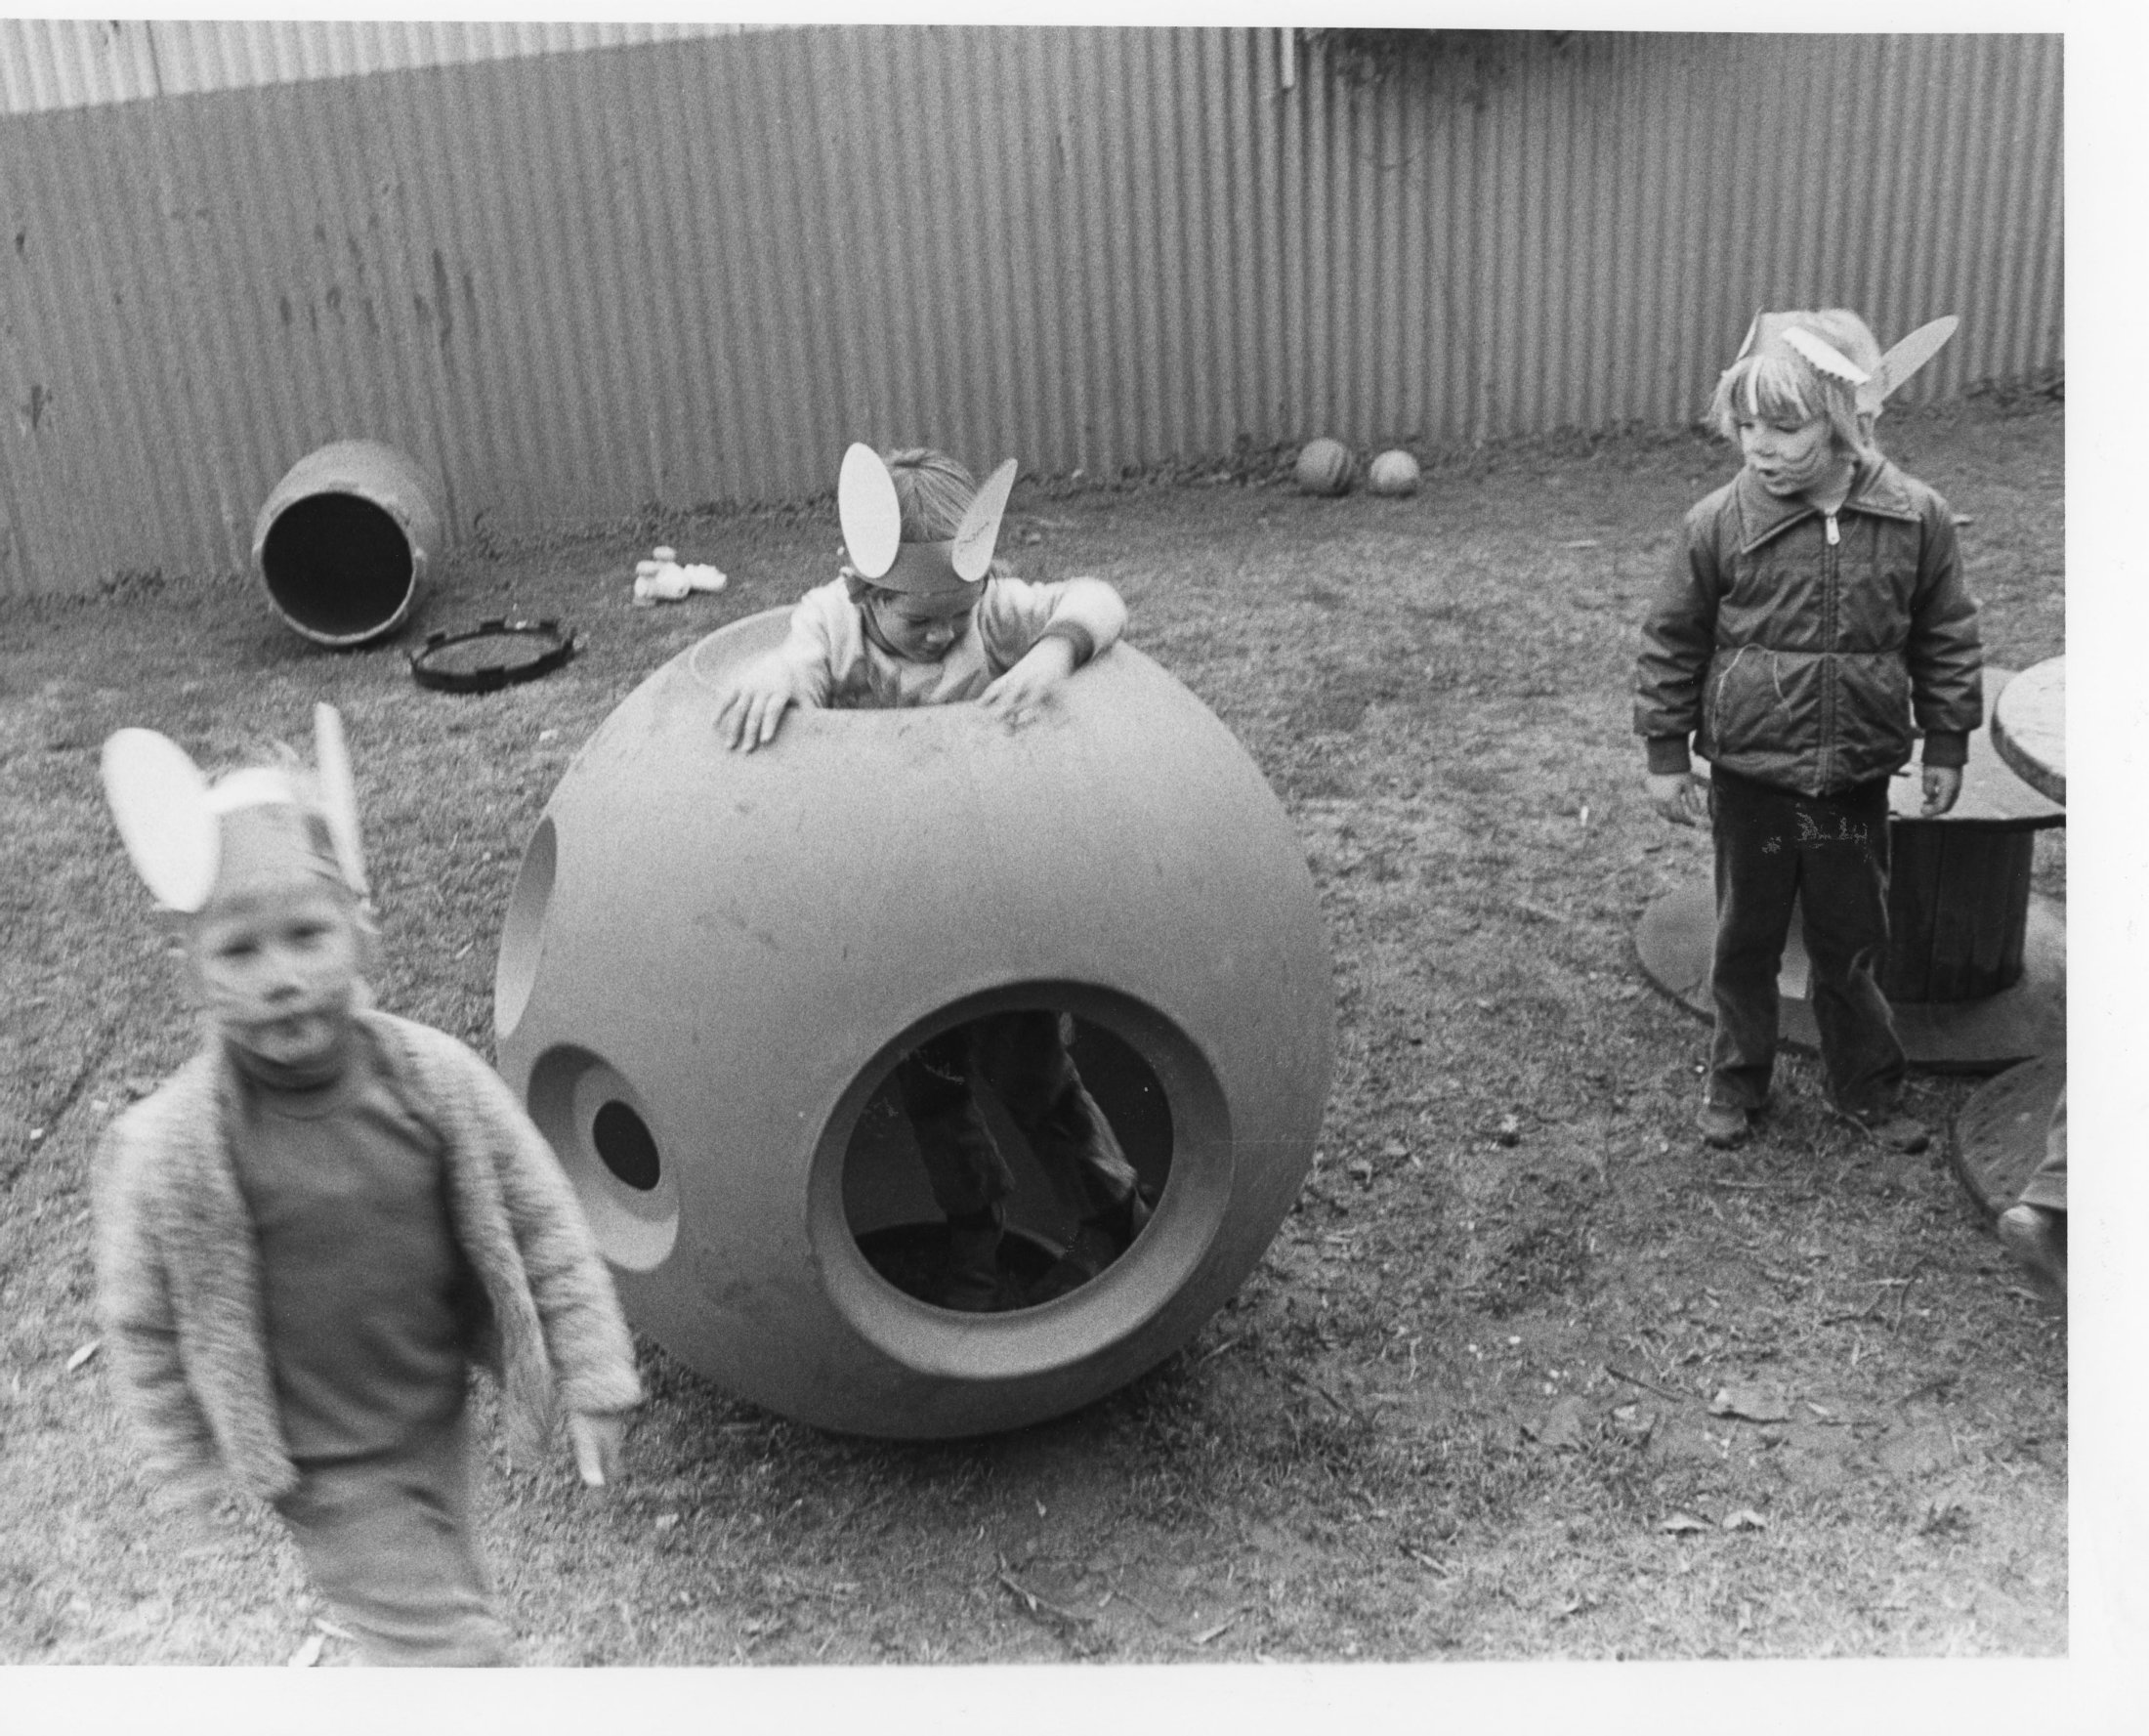 1970-80 - KC - Children Dressed Up As Mice (6)